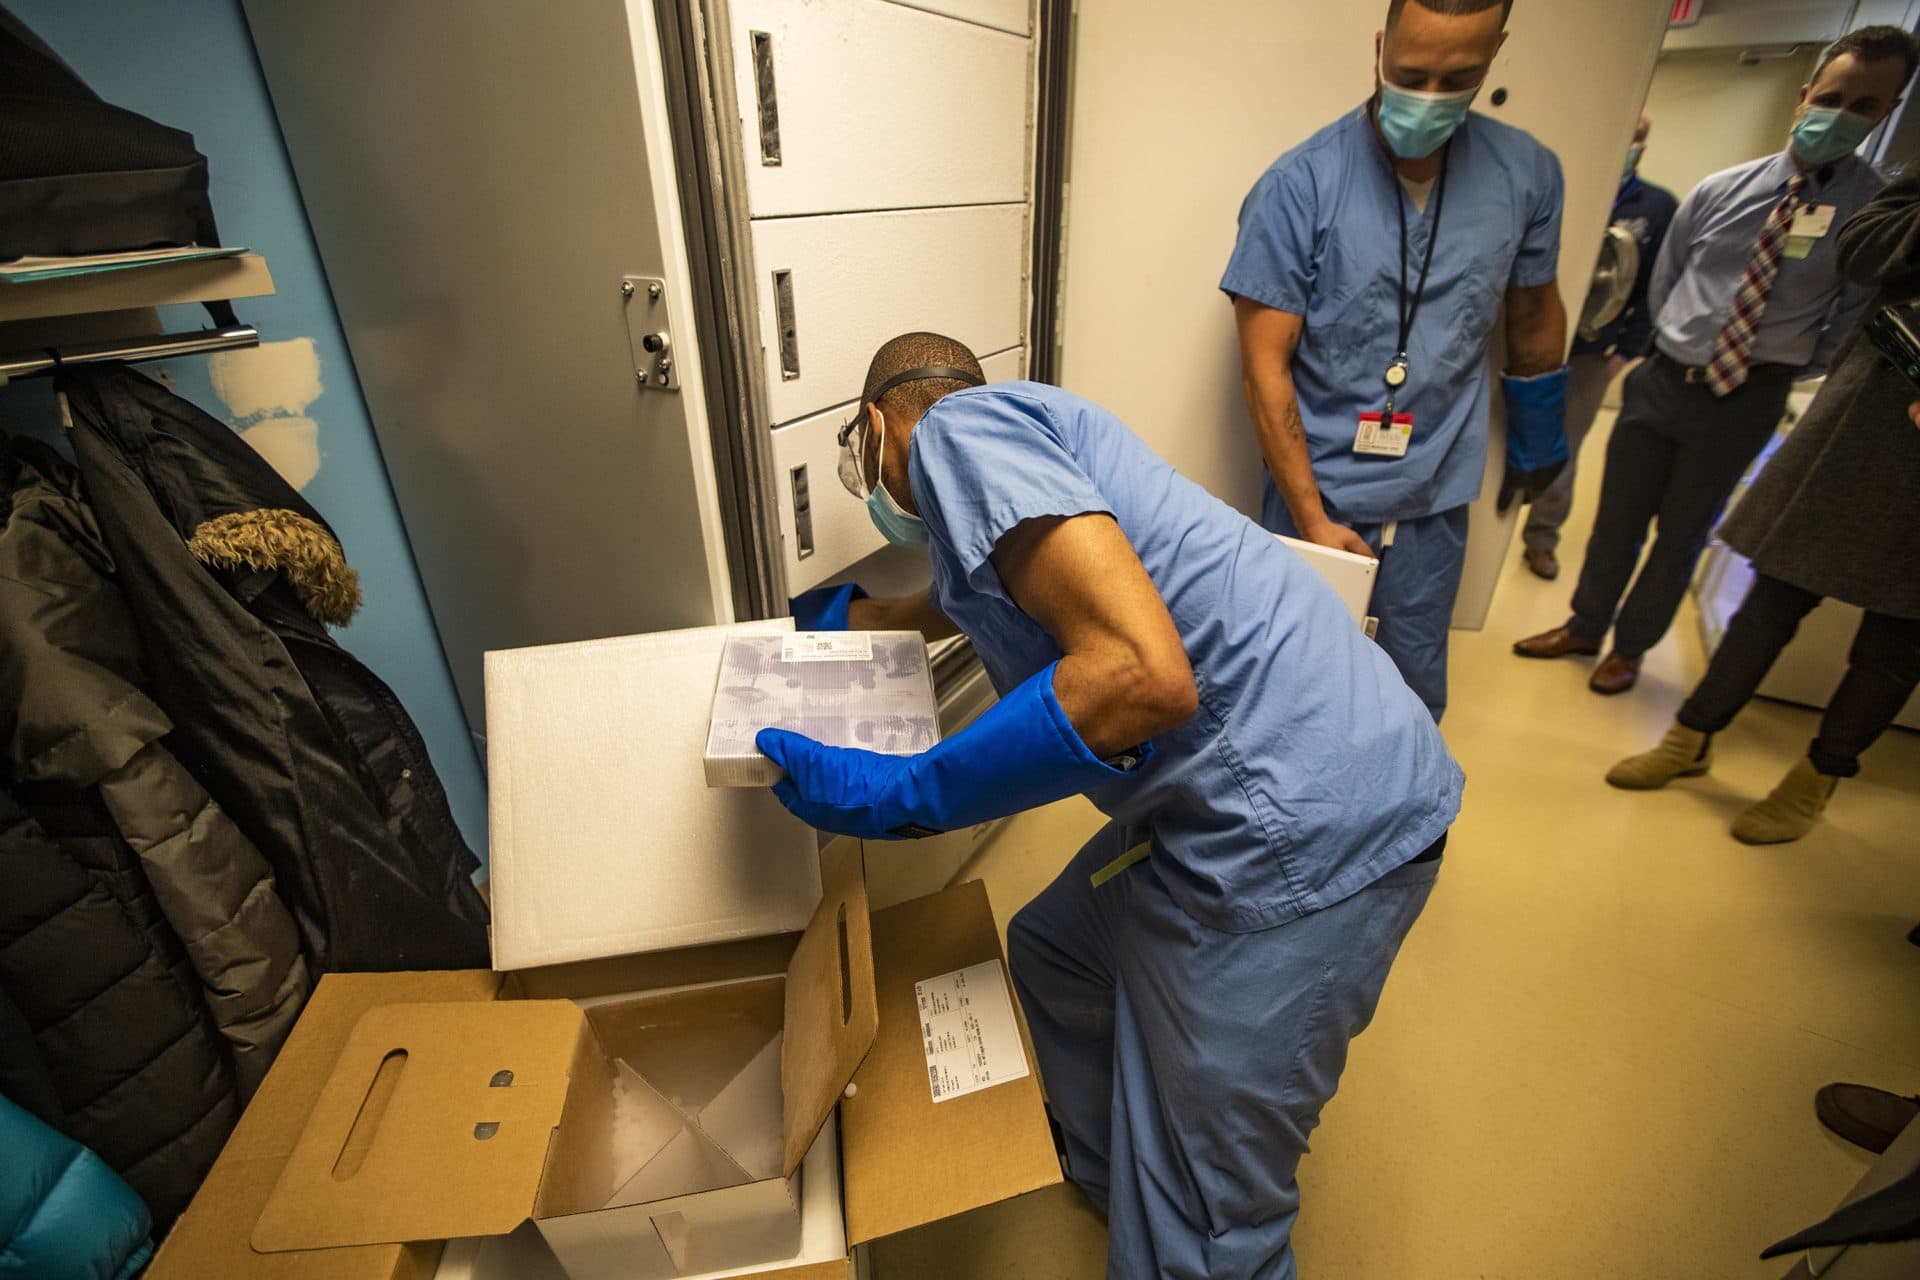 Boston Medical Center pharmacy technical worker William Senior places two trays of the coronavirus vaccine into a freezer, kept at temperatures between -60 and -80 degrees, which was just delivered at 5:45 a.m. to the hospital. (Jesse Costa/WBUR)